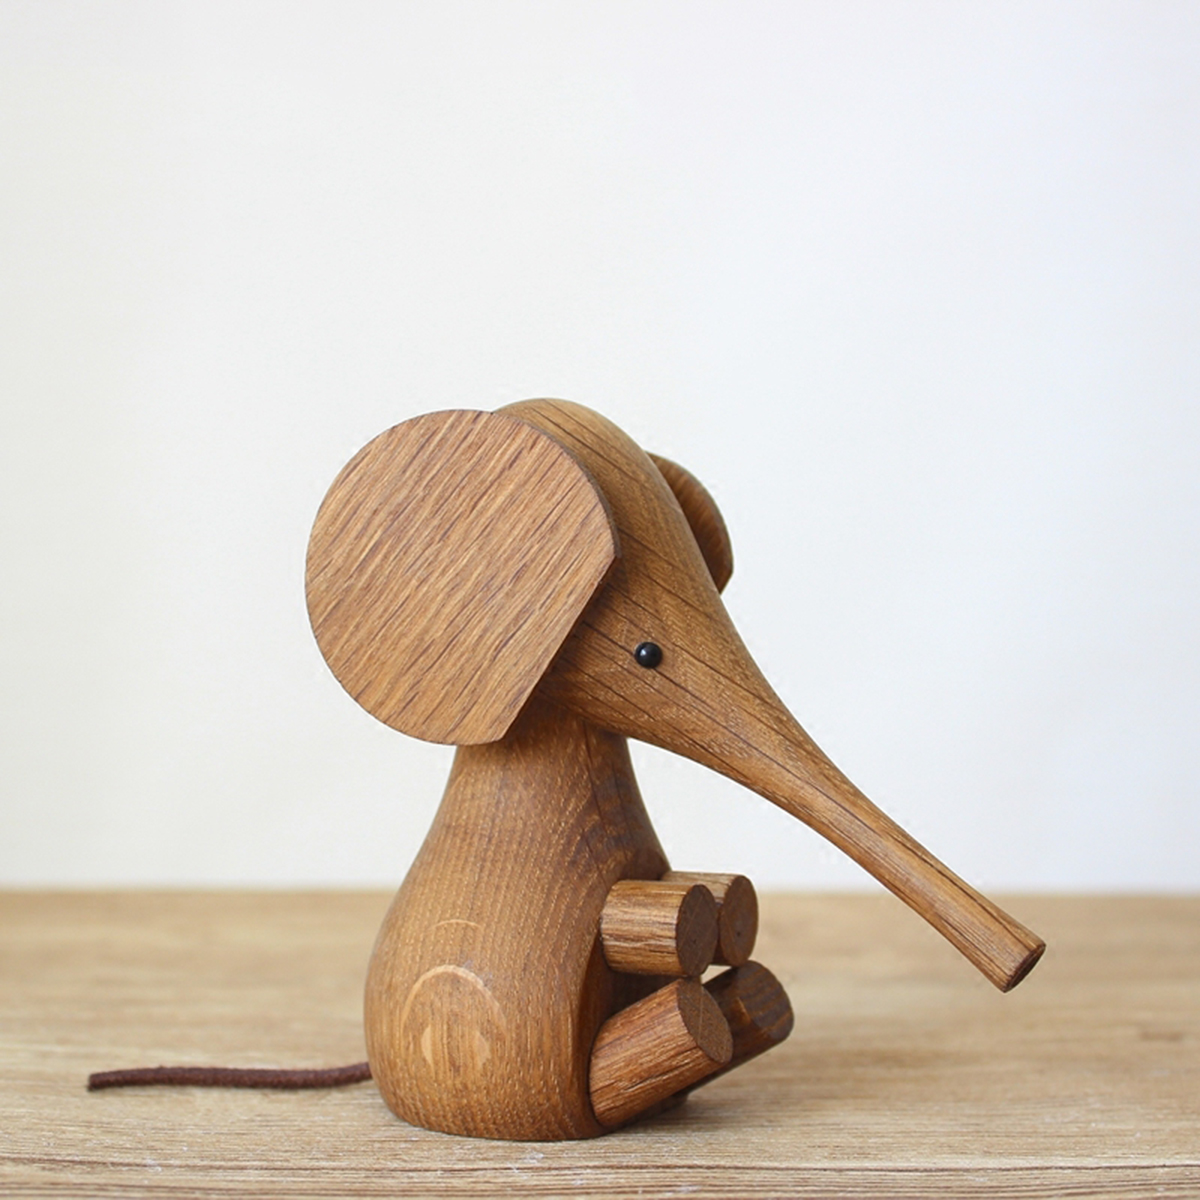 Adjustable-Handicraft-Elephant-Wooden-Animal-Doll-Smooth-Surface-Home-Decorations-Gift-1640775-6